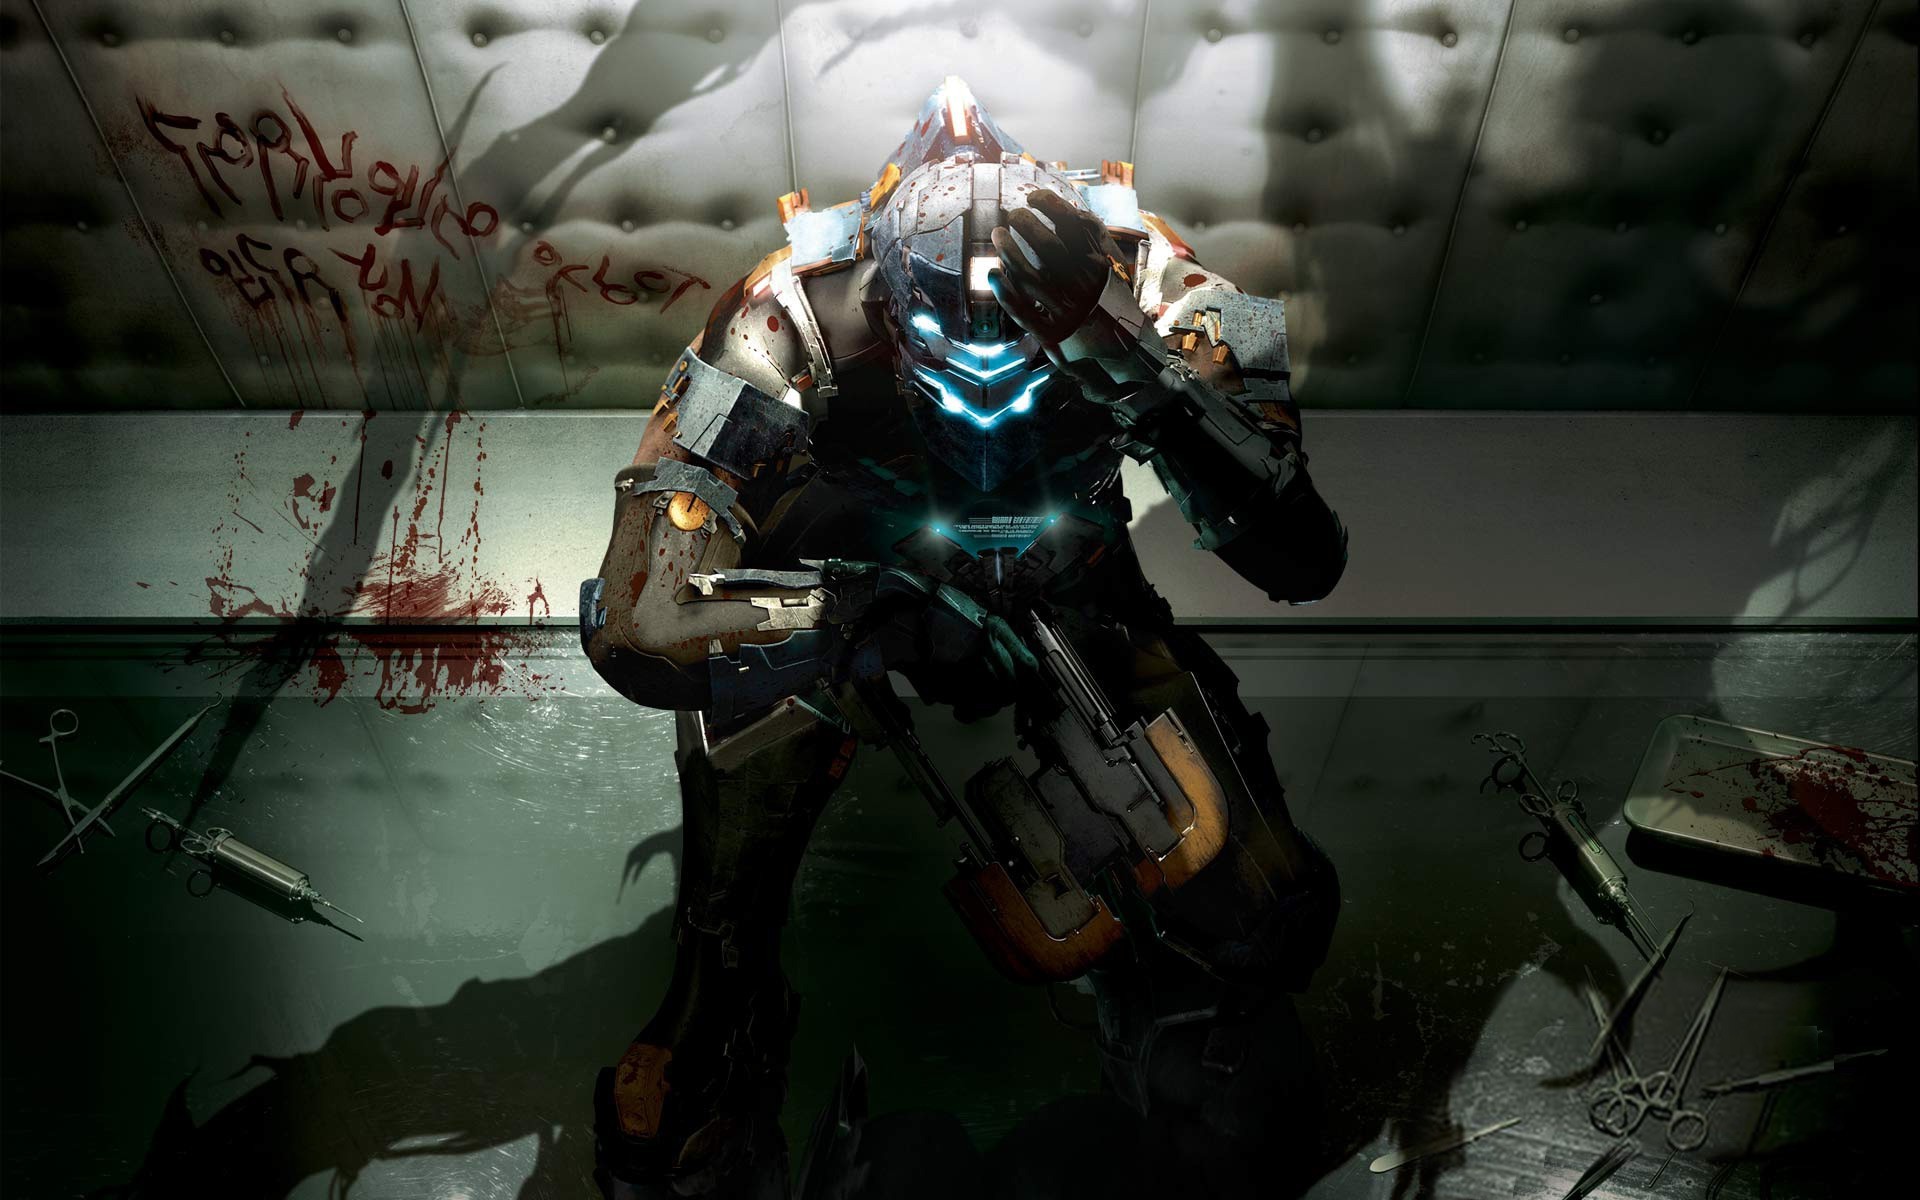 1920x1200 deadspacehdwallpaper Airborne Gamer The Elite Gaming Blog | HD Wallpapers |  Pinterest | Dead space, Hd wallpaper and Wallpaper